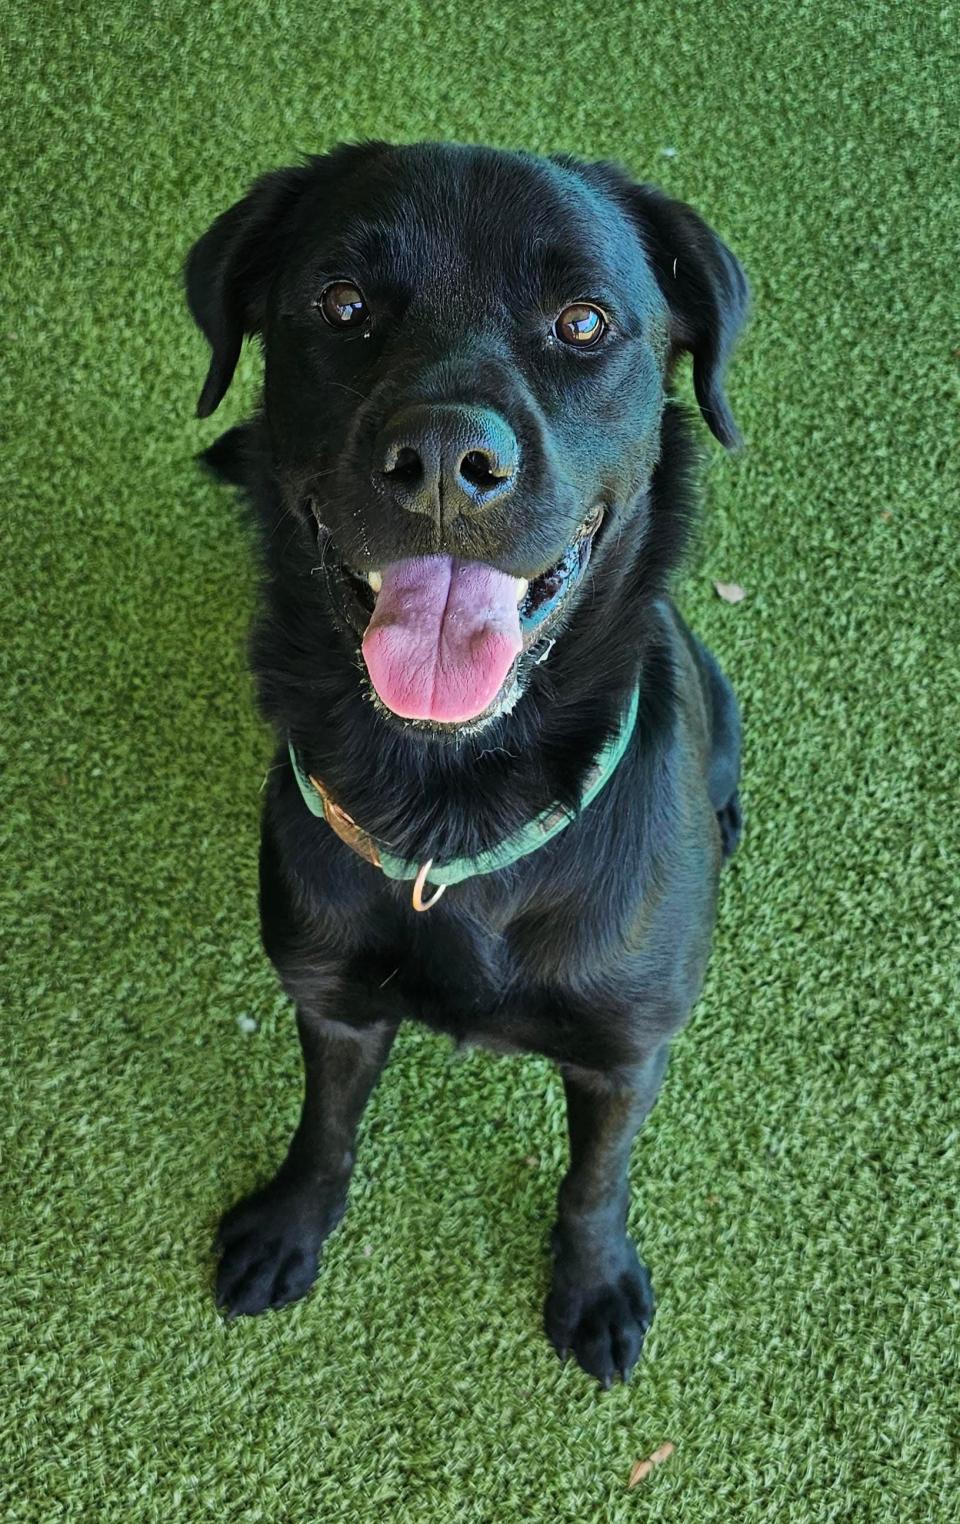 Wall-E is a Labrador retriever mix who loves to play. His previous family told staff that he’s very friendly with everyone, loves to be petted, is very active and likes to sleep in his crate. He also does great with a leash.